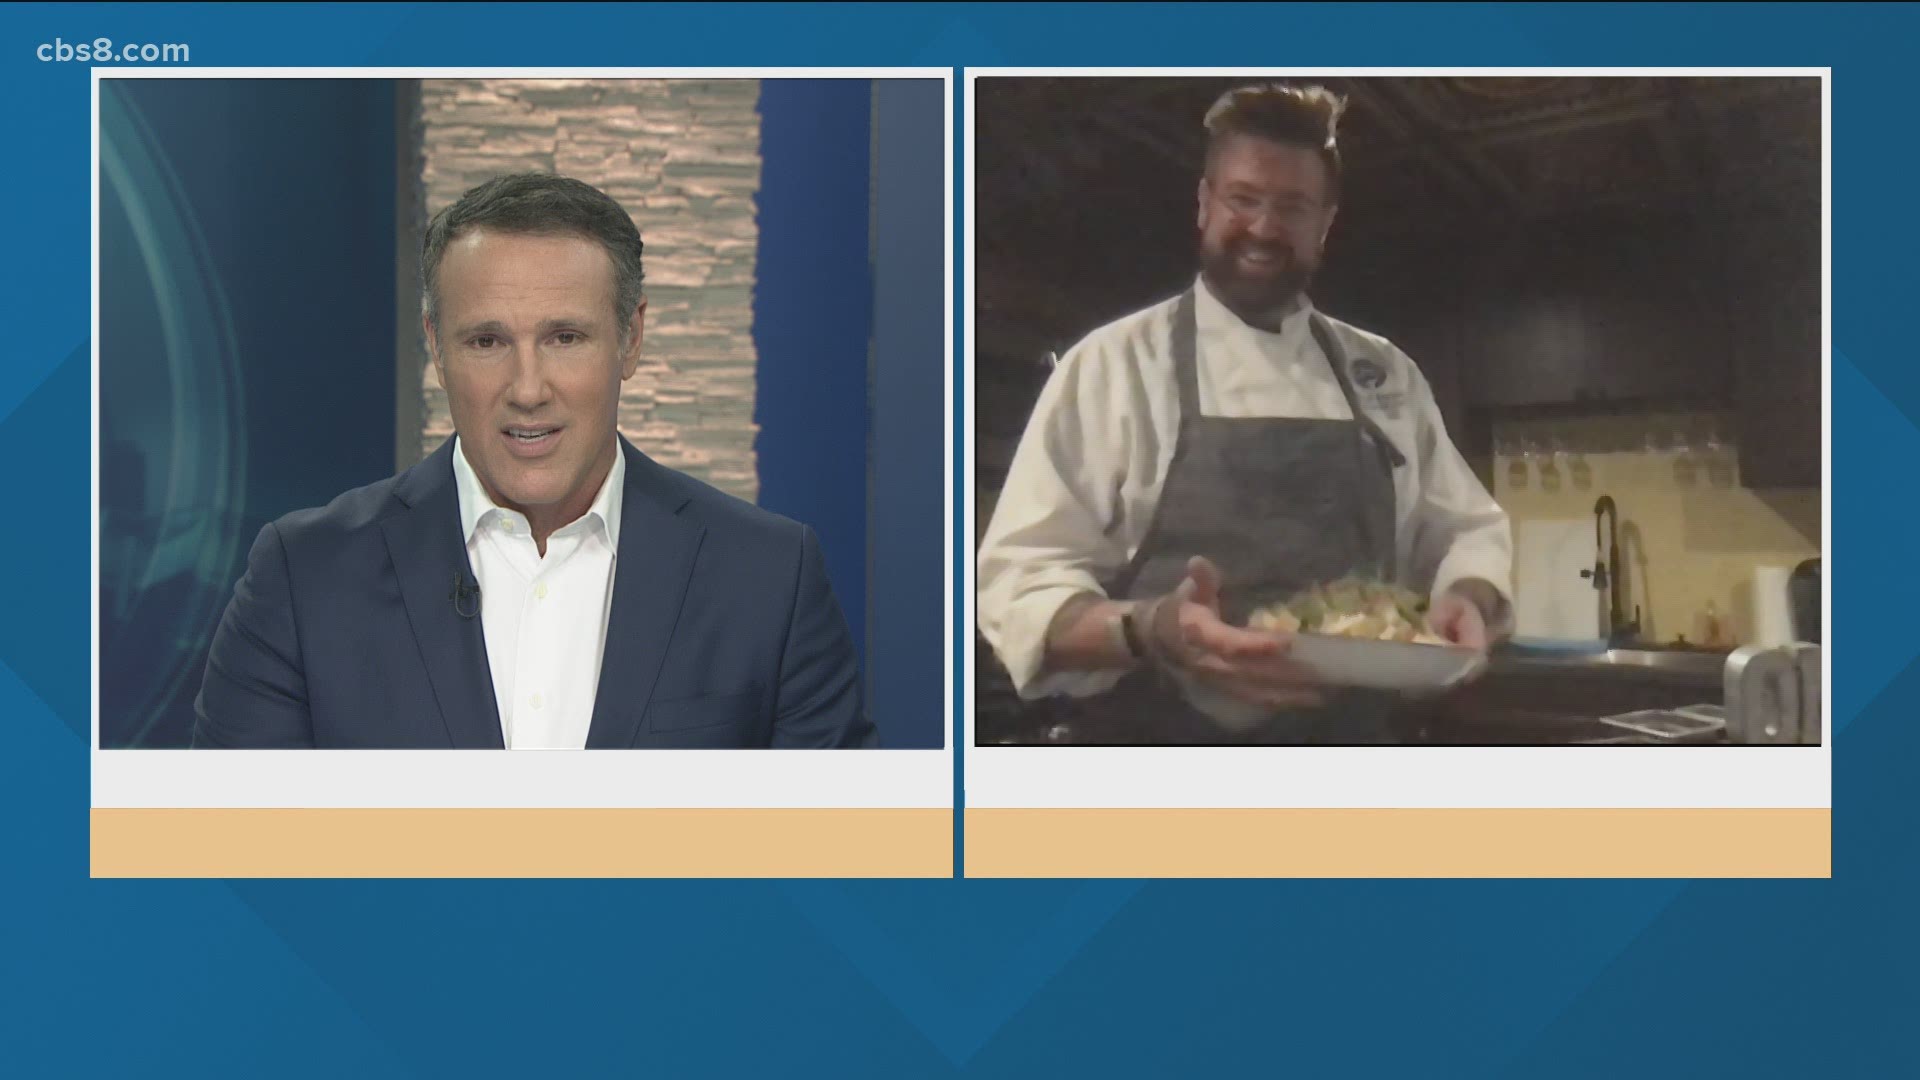 Millions are dishing up Thanksgiving leftovers tonight. OMG Hospitality Group's Daniel England joins The Four for some innovative Thanksgiving-style leftover dishes.